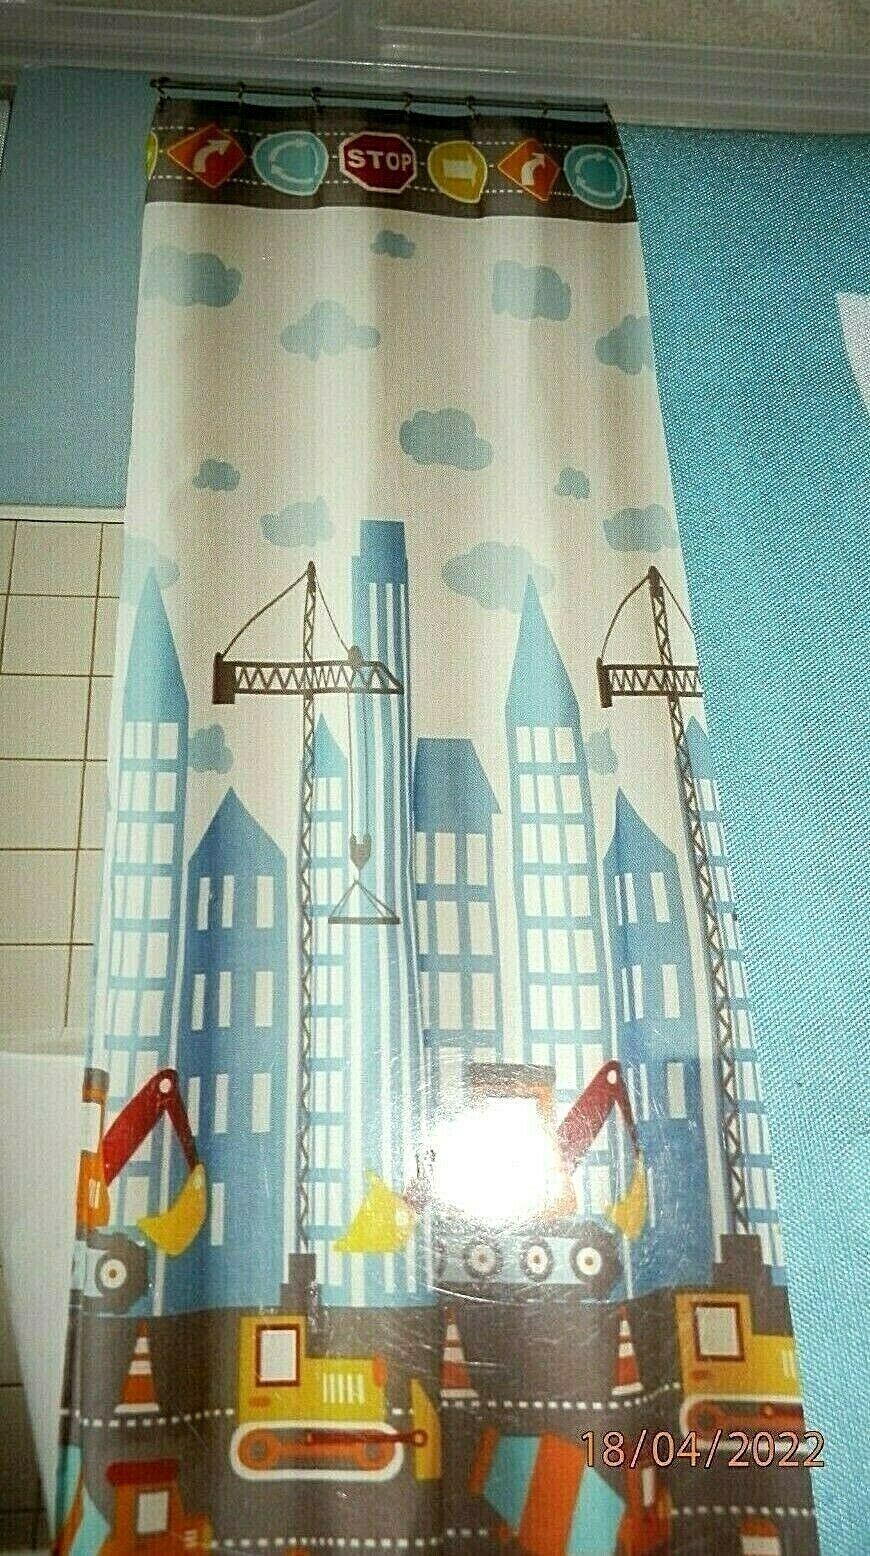 NEW Kids CONSTRUCTION ZONE Fabric SHOWER CURTAIN  Trucks Buildings Signs - $24.60